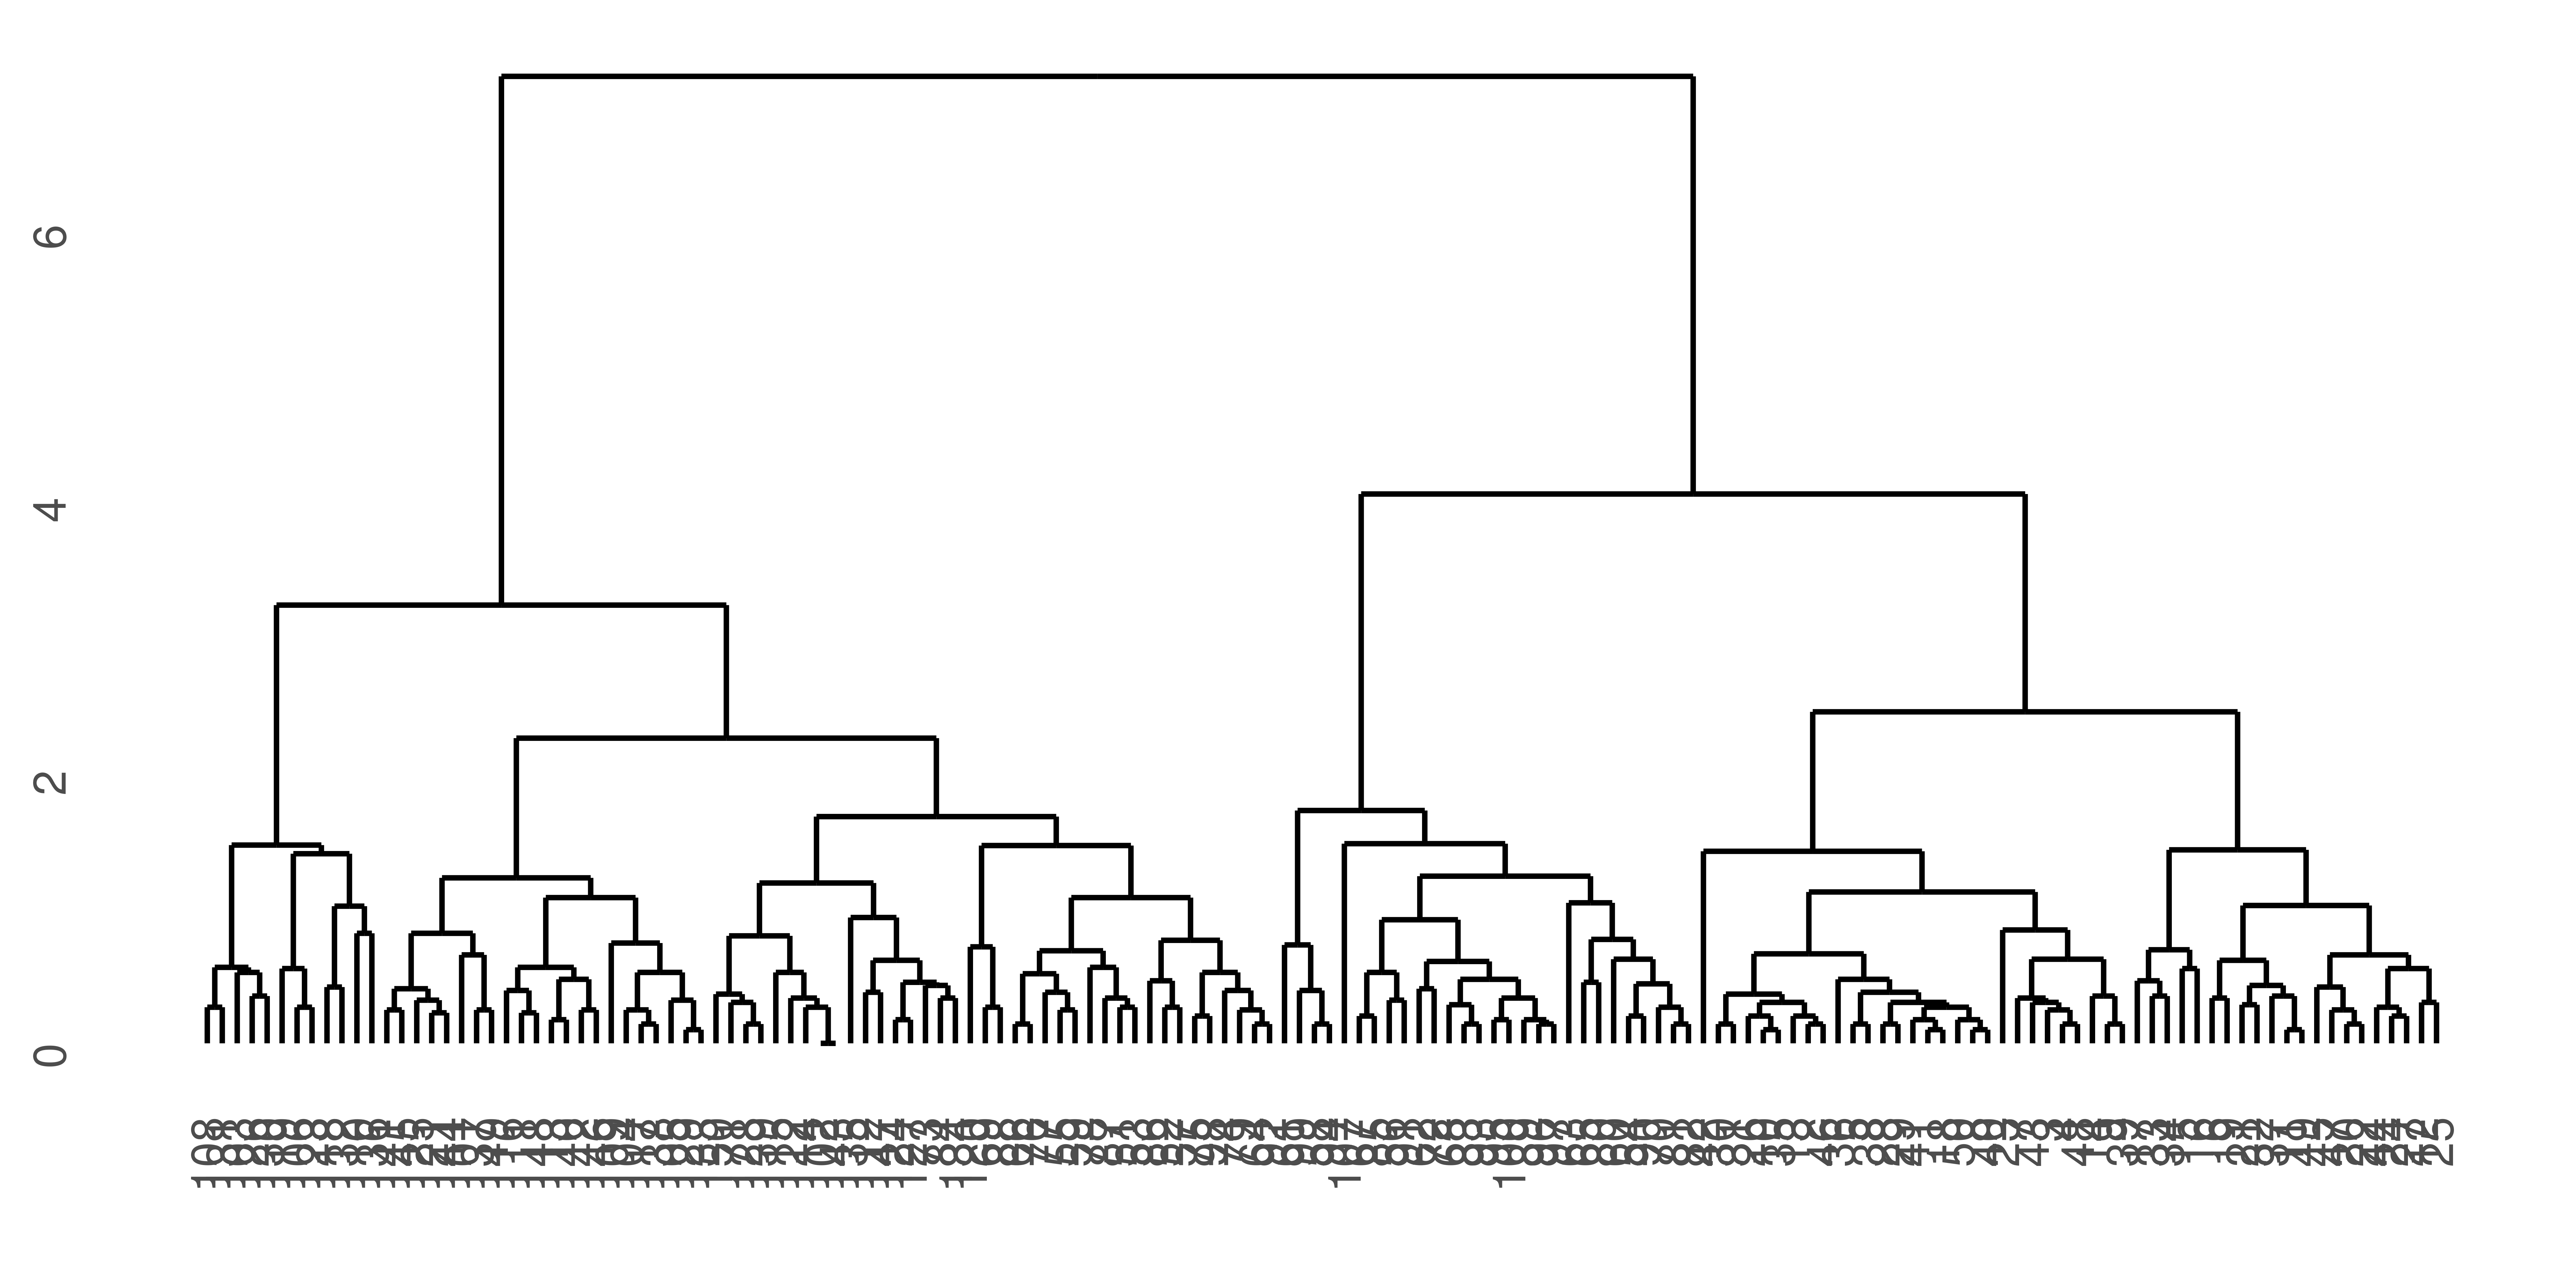 A hierarchical cluster dendrogram.